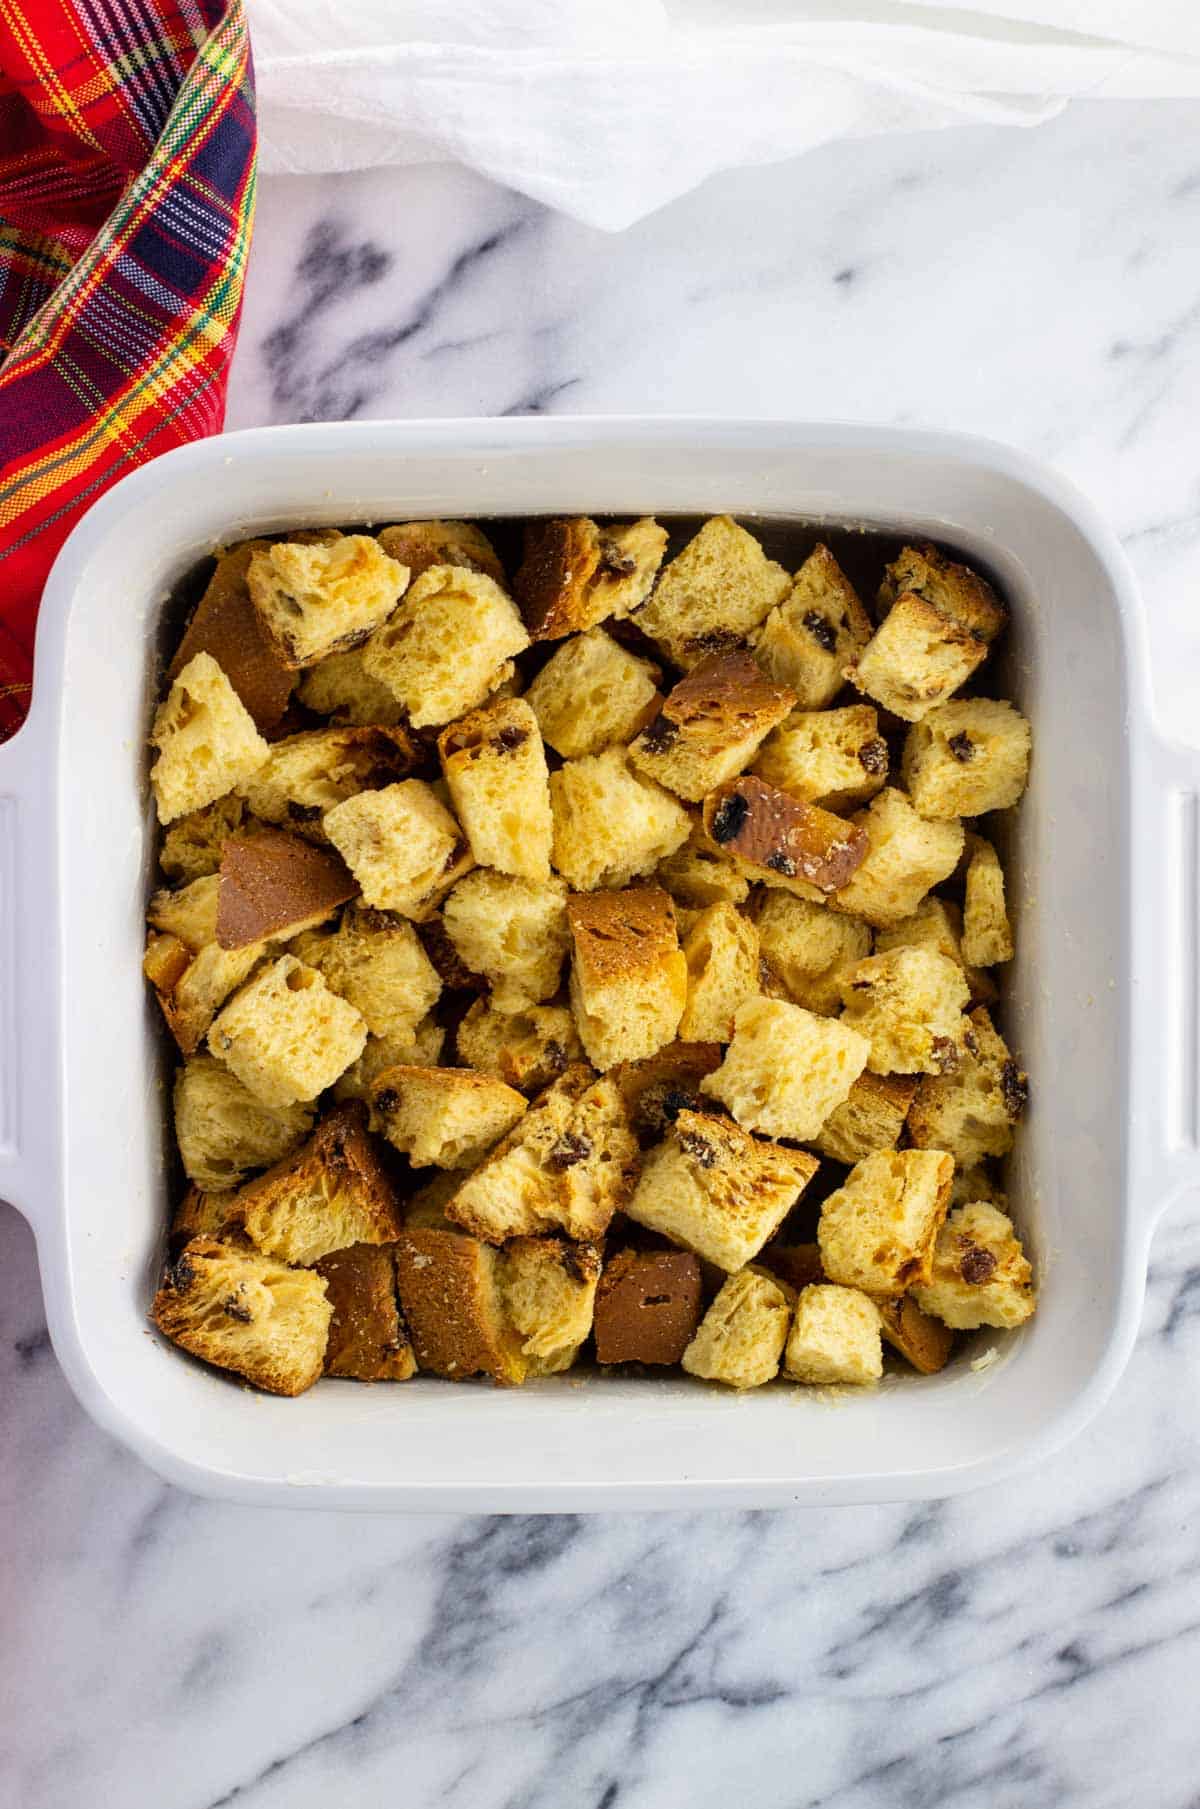 Dried panettone cubes in a square baking dish.